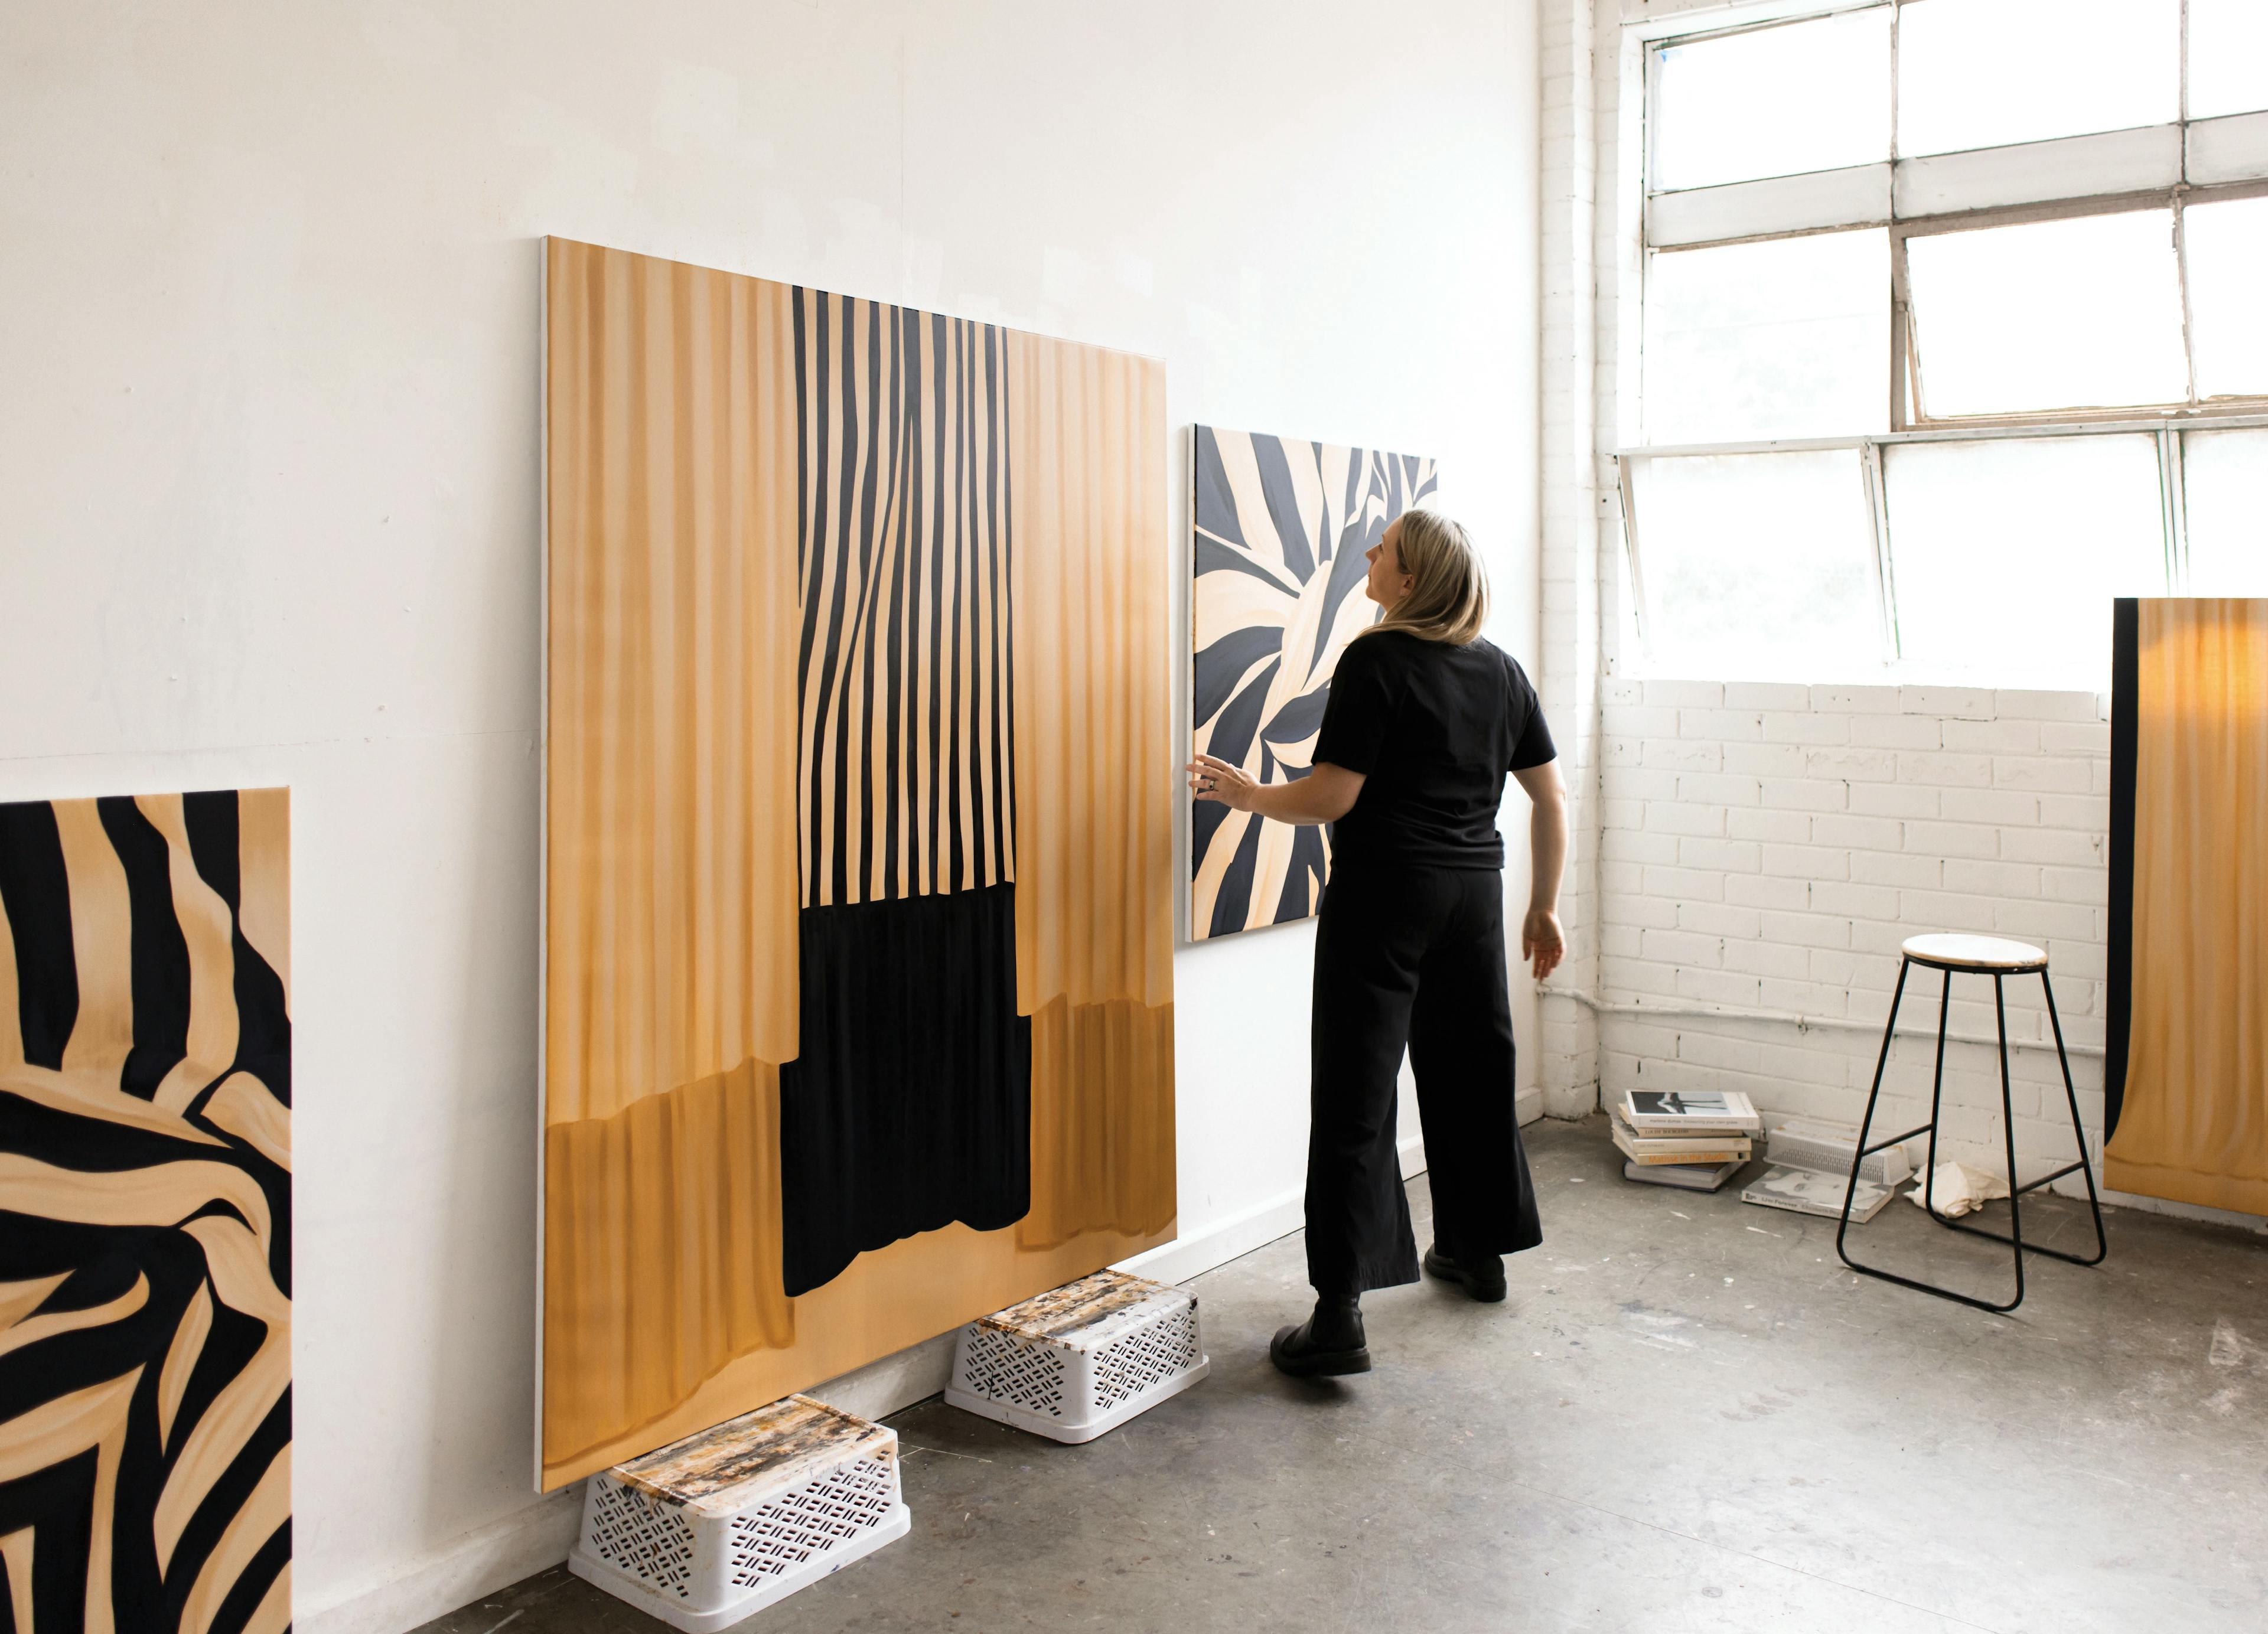 Artist Caroline Walls in her studio with large, beige and black striped paintings on canvas.